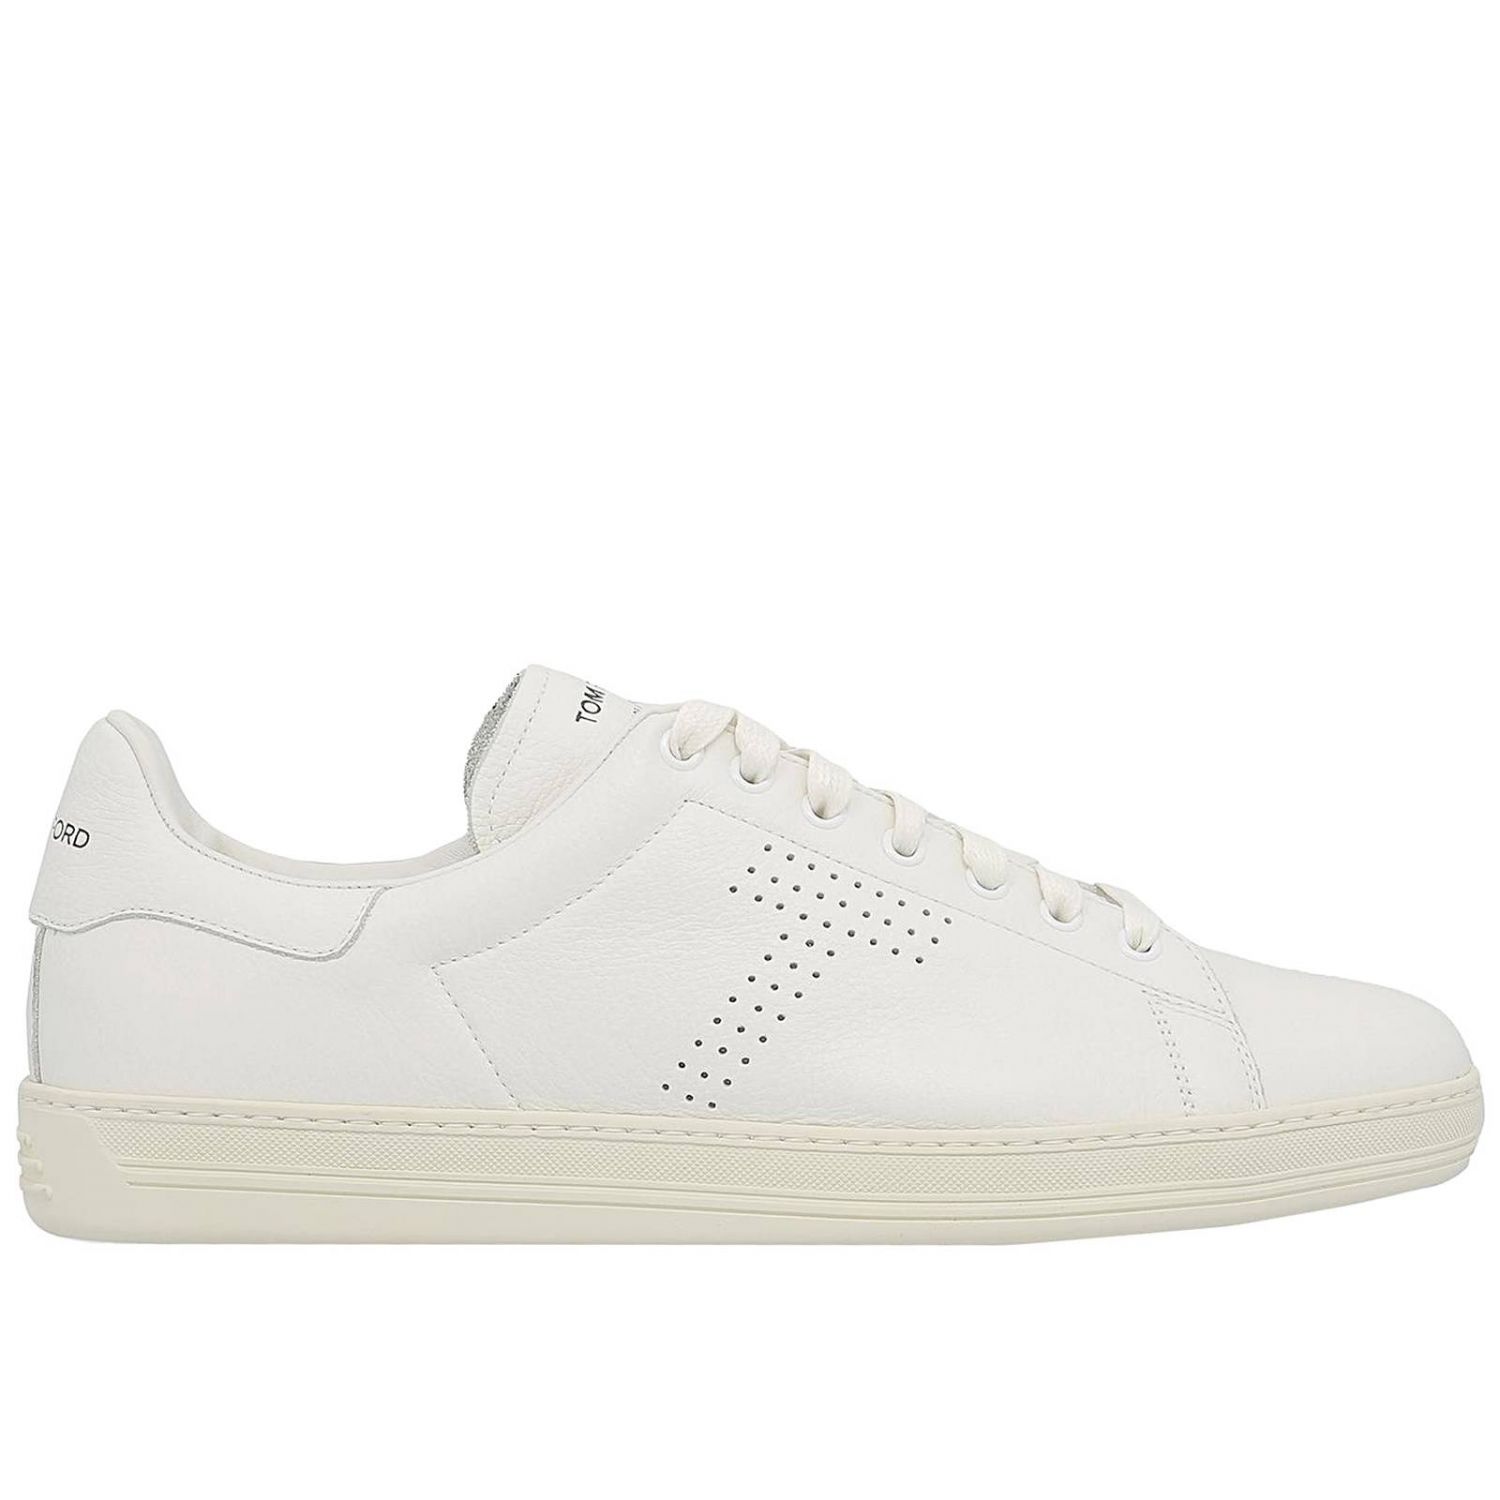 Tom Ford Outlet: Trainers men | Trainers Tom Ford Men White 